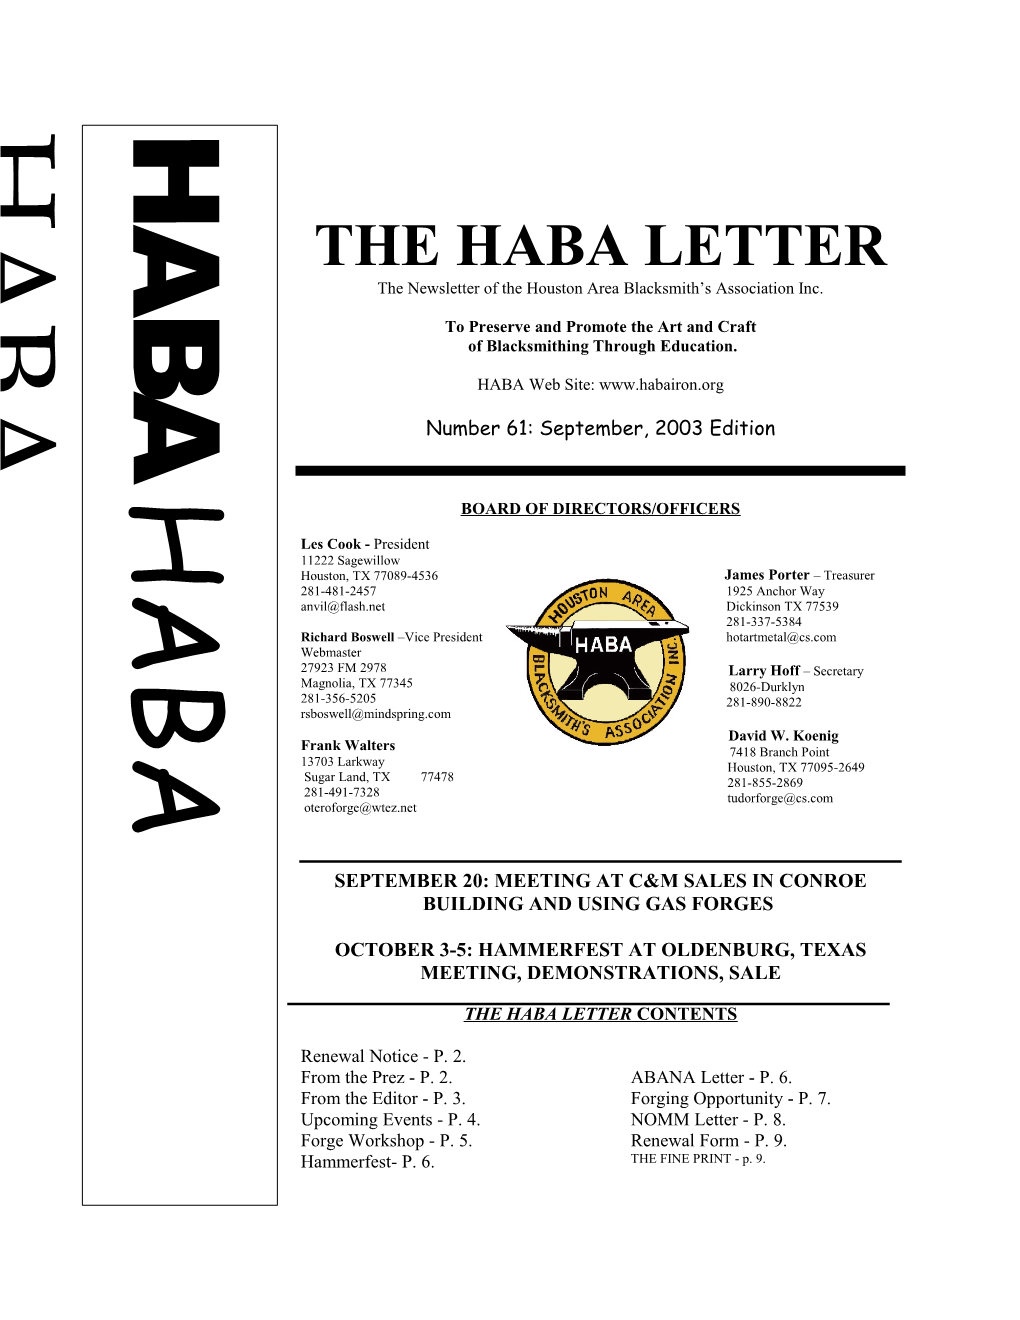 The Haba Letter